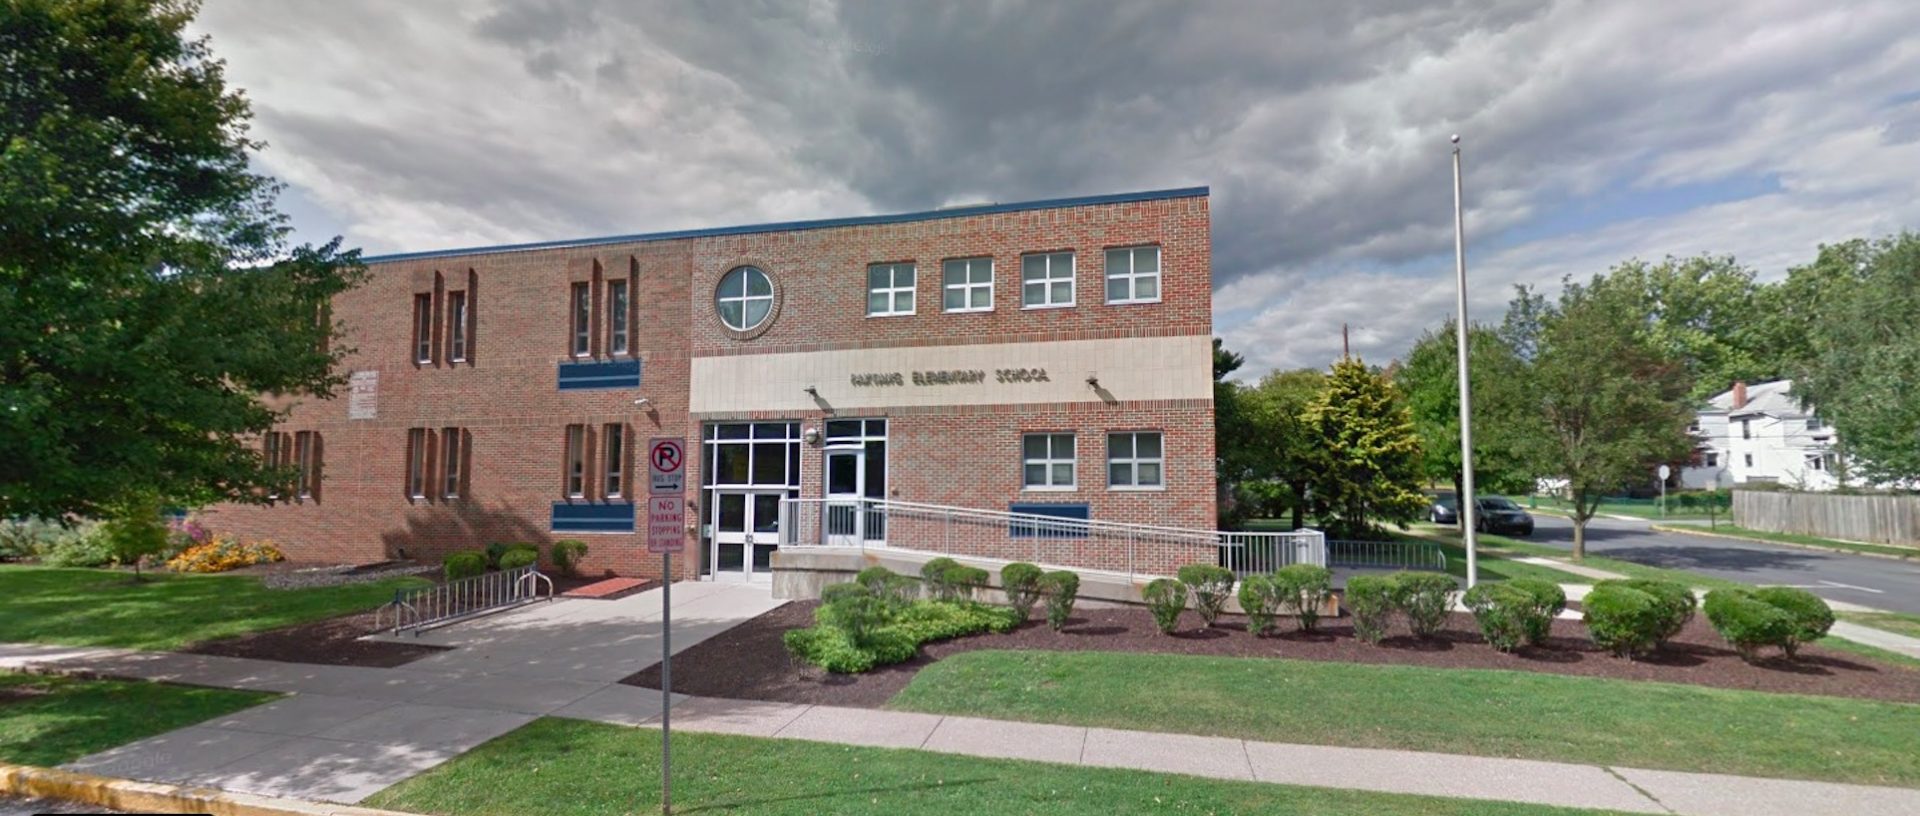 Paxtang Elementary School, part of the Central Dauphin School District, is seen in this August 2014 image from Google Maps.